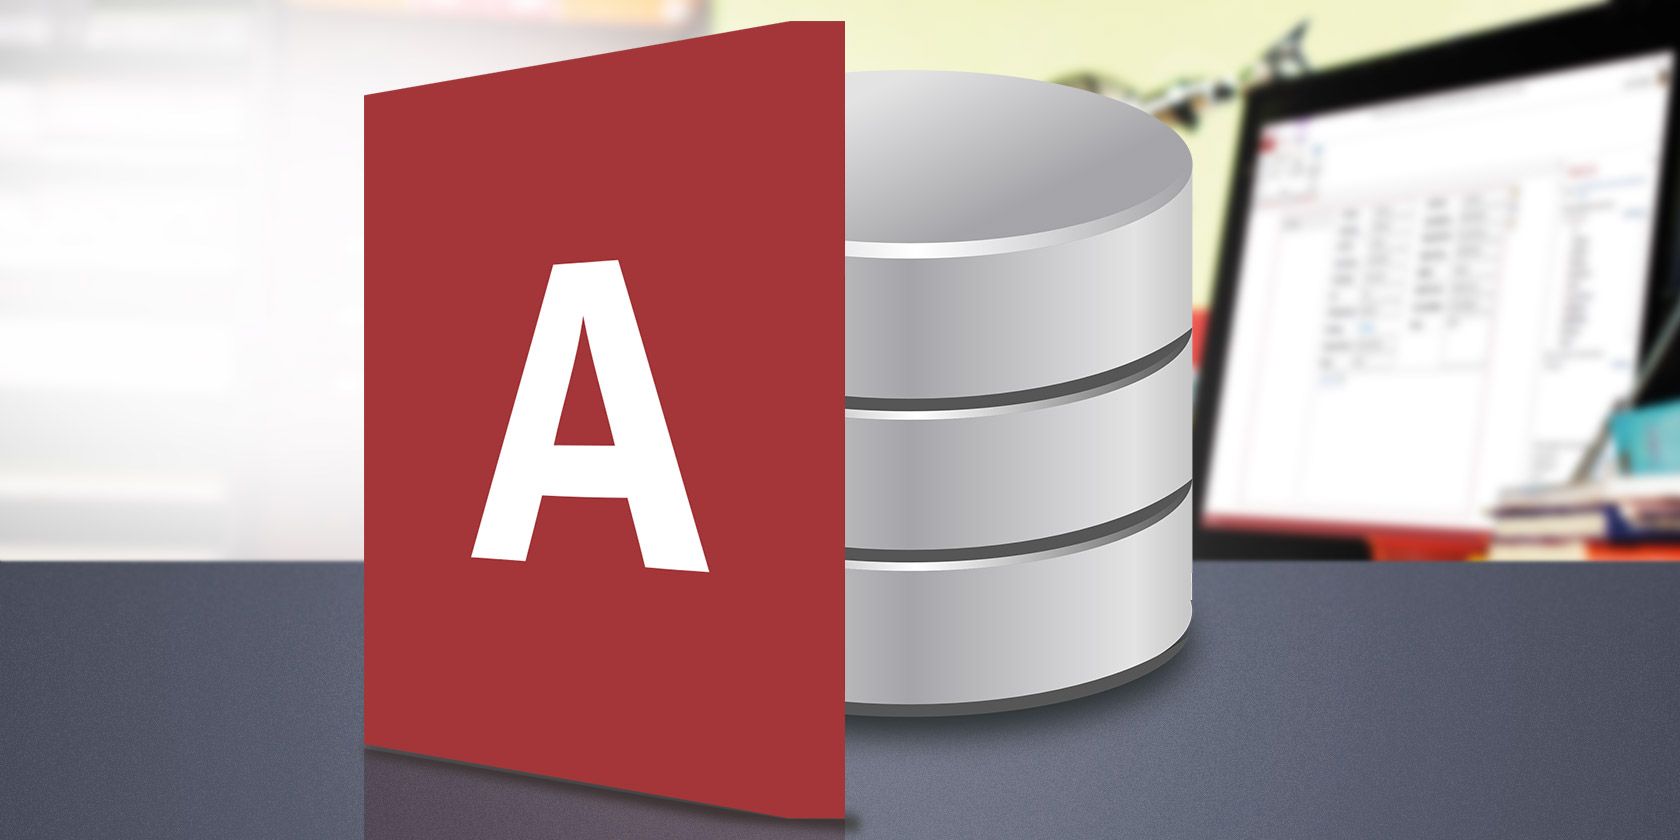 How to Learn Microsoft Access: 7 Free Online Resources